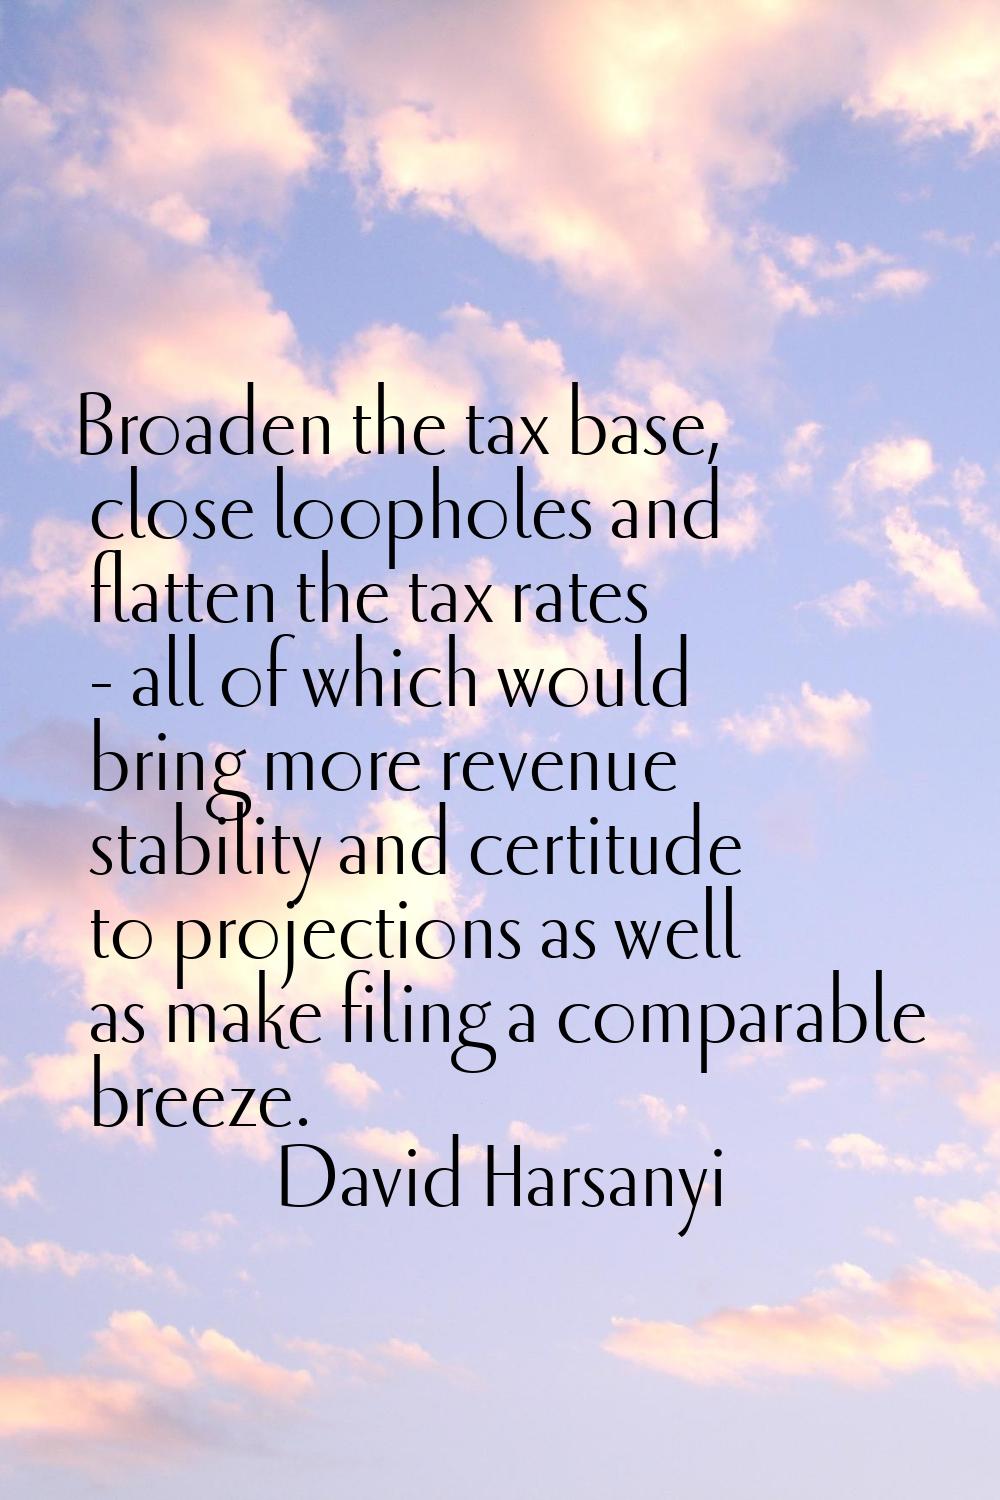 Broaden the tax base, close loopholes and flatten the tax rates - all of which would bring more rev